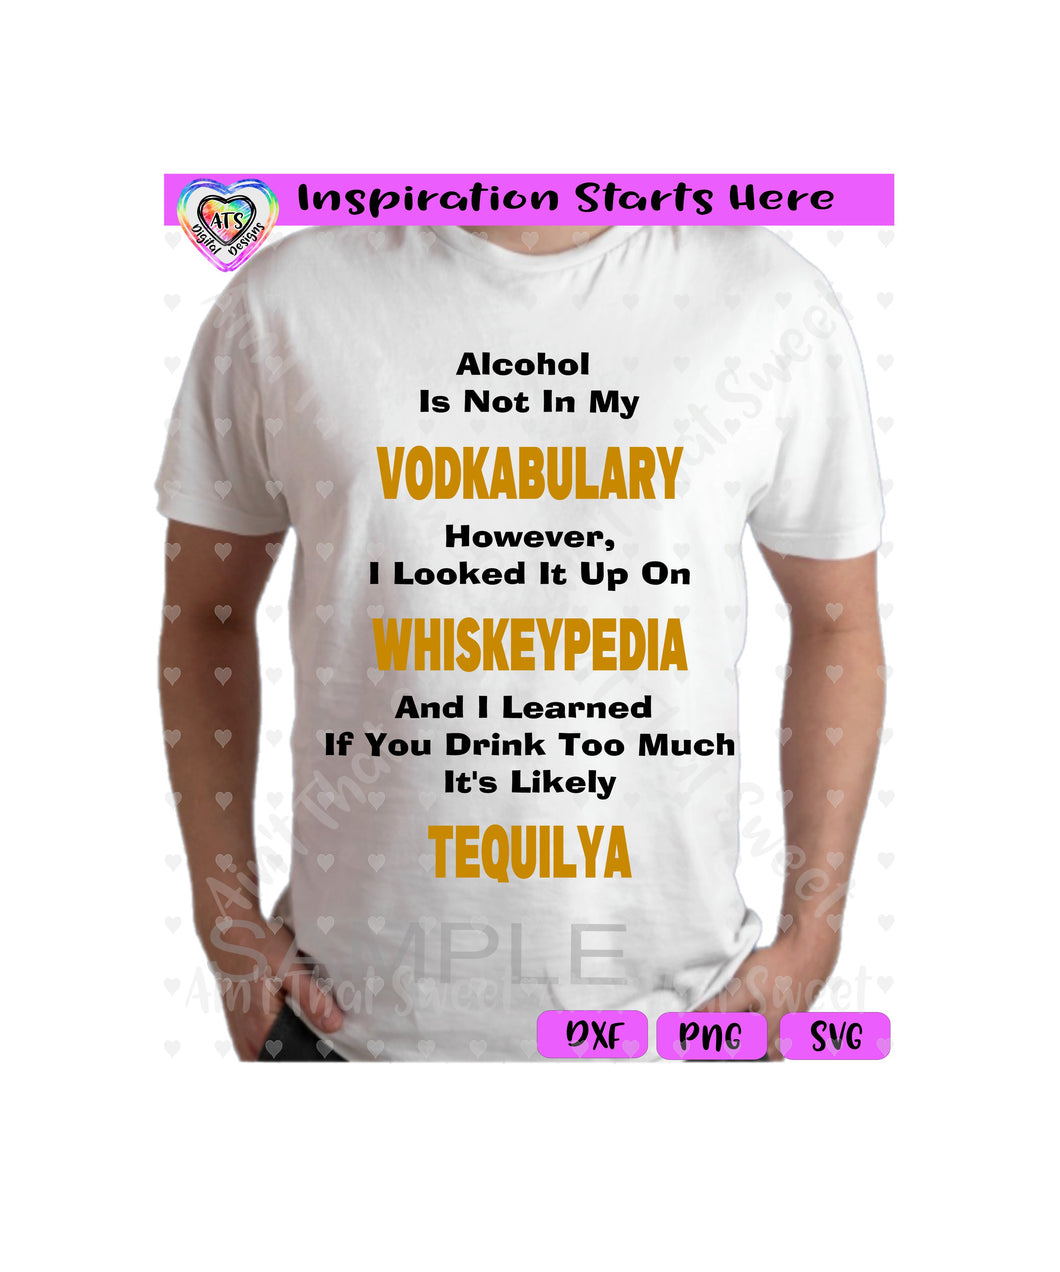 Alcohol Is Not In My Vodkabulary | Whiskeypedia | Tequilya - Transparent PNG SVG DXF - Silhouette, Cricut, ScanNCut